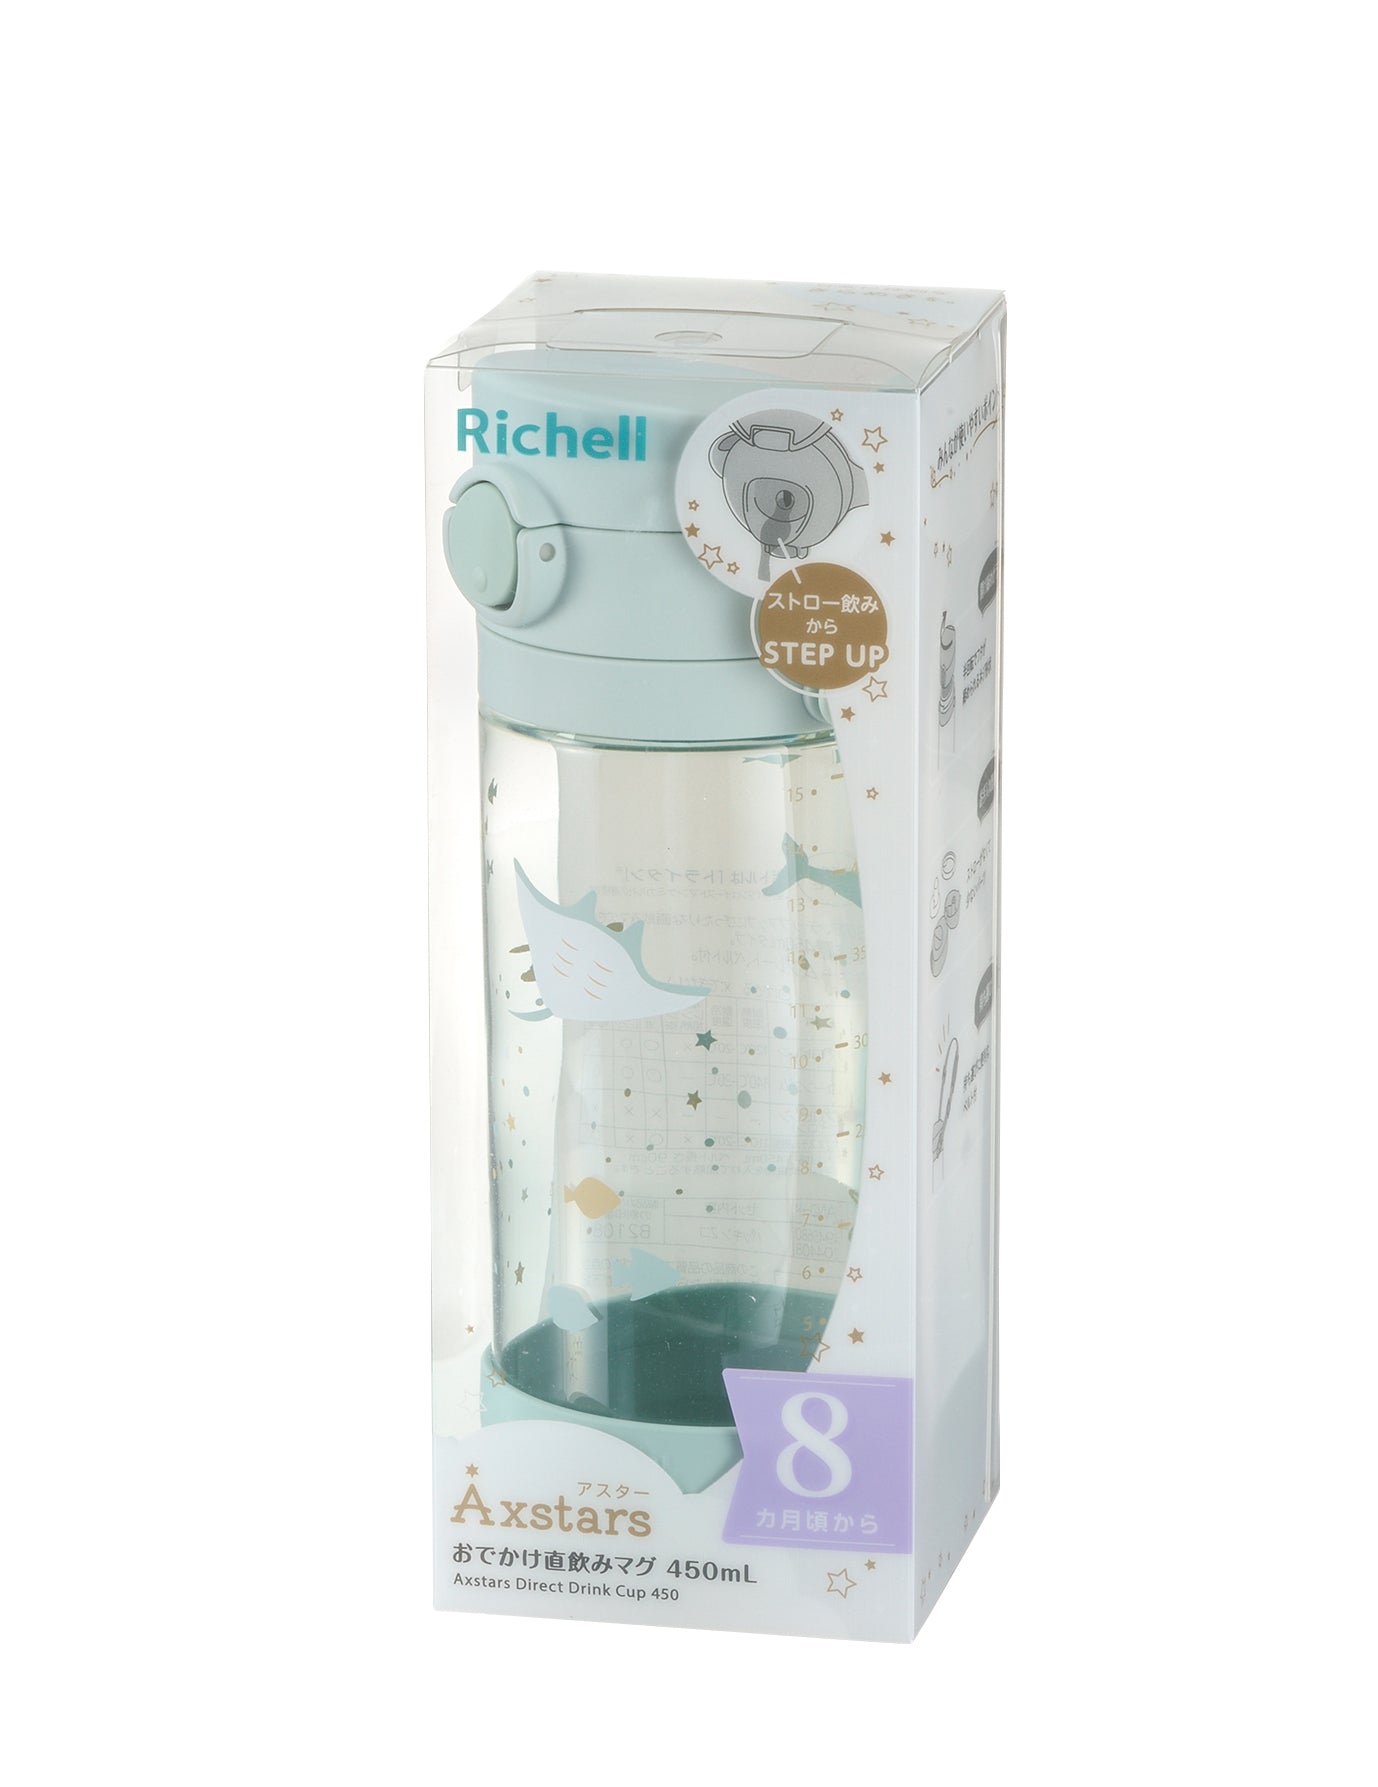 Richell Axstars Direct Drink Cup 450ml